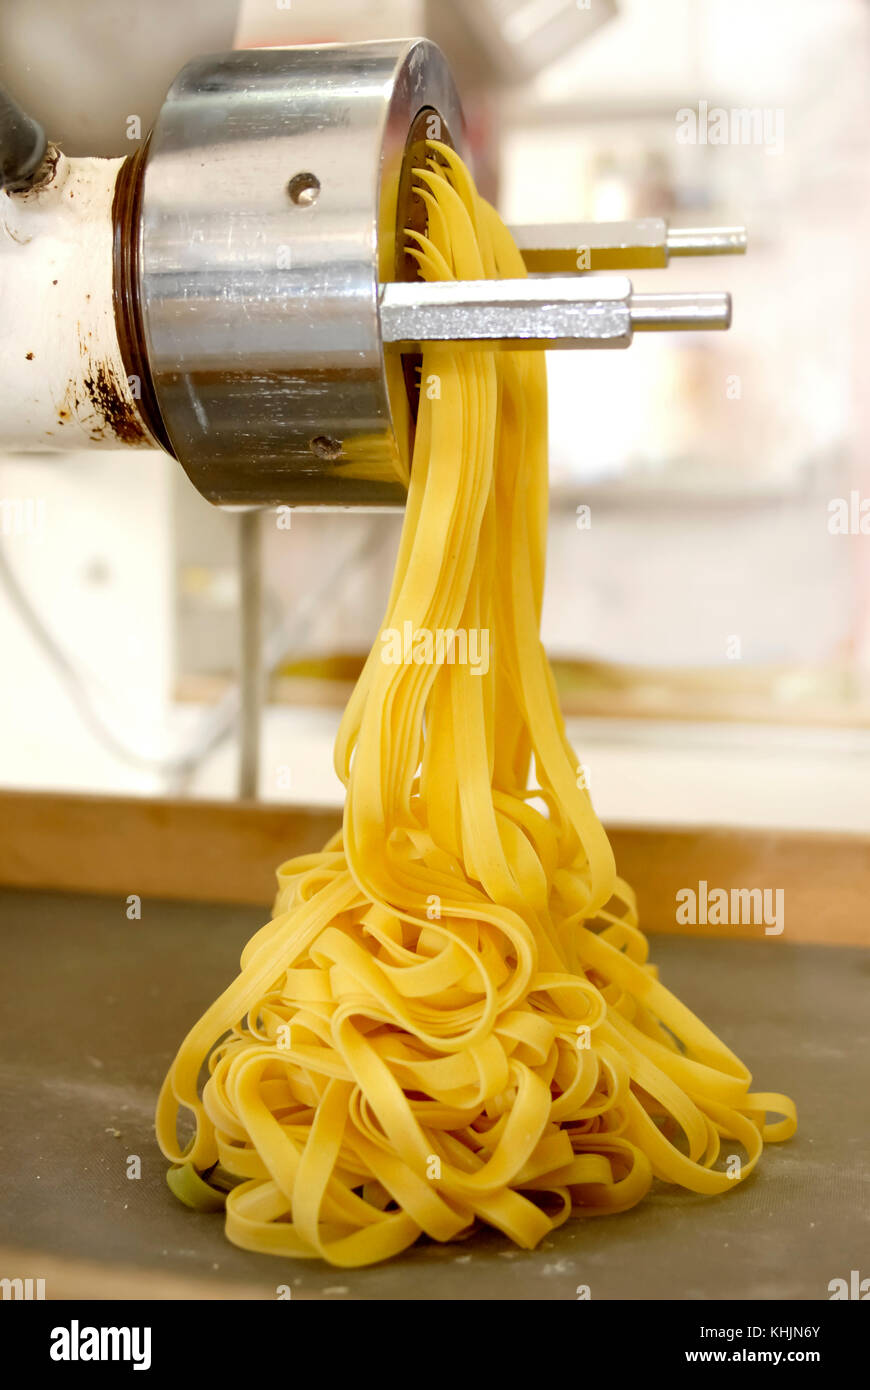 Fresh home-made pasta tagliatelle coming out of pasta machine Stock Photo